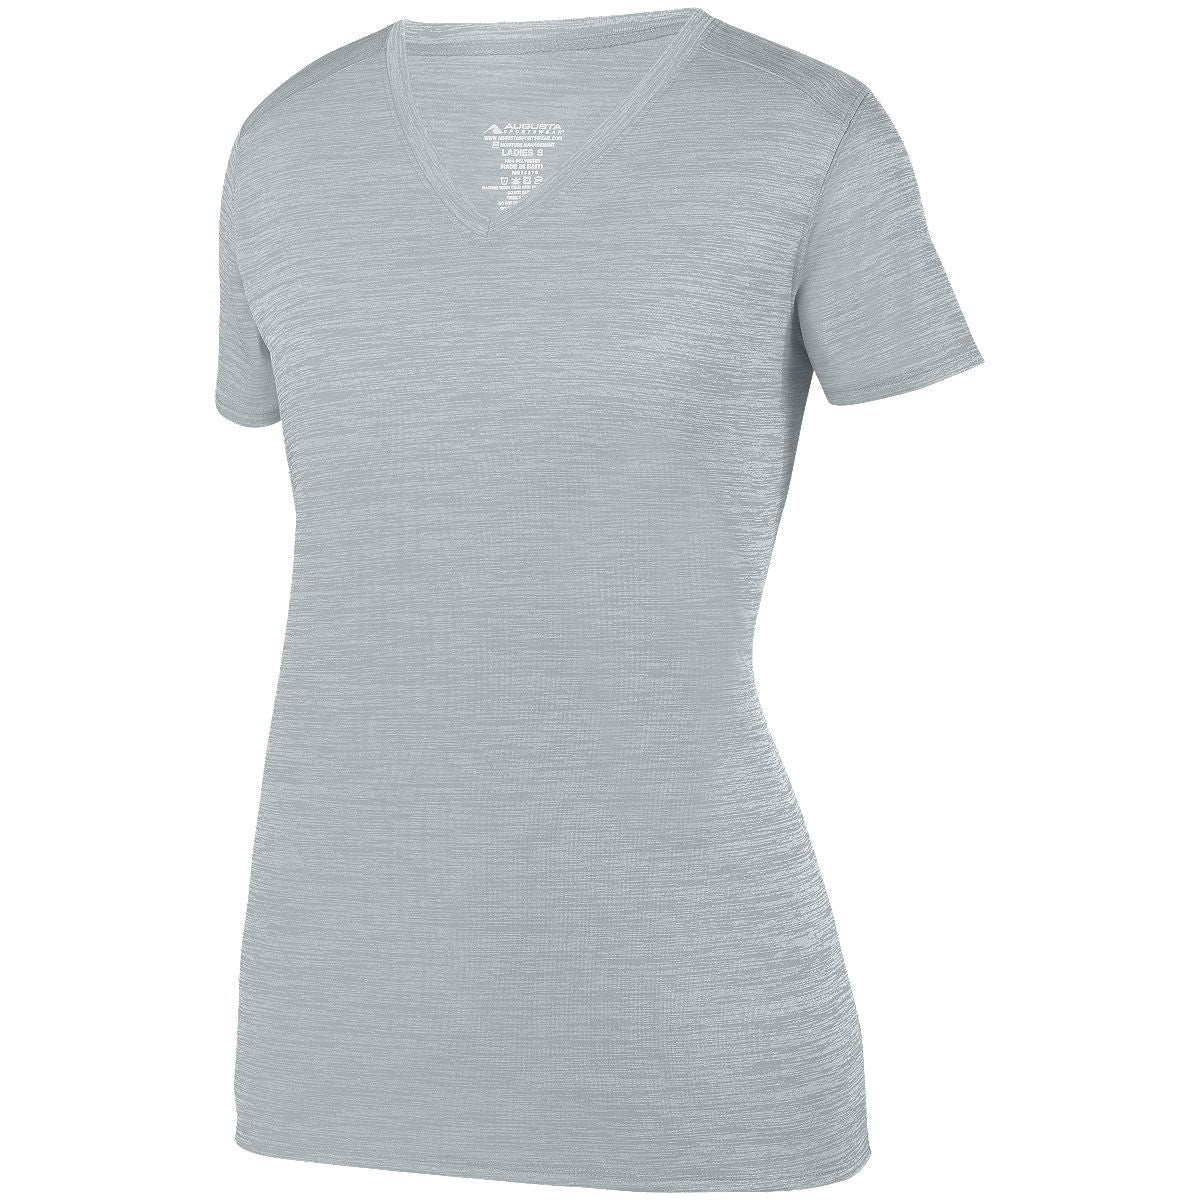 Augusta Sportswear Ladies Shadow Tonal Heather Training Tee in Silver  -Part of the Ladies, Ladies-Tee-Shirt, T-Shirts, Augusta-Products, Shirts, Tonal-Fleece-Collection product lines at KanaleyCreations.com